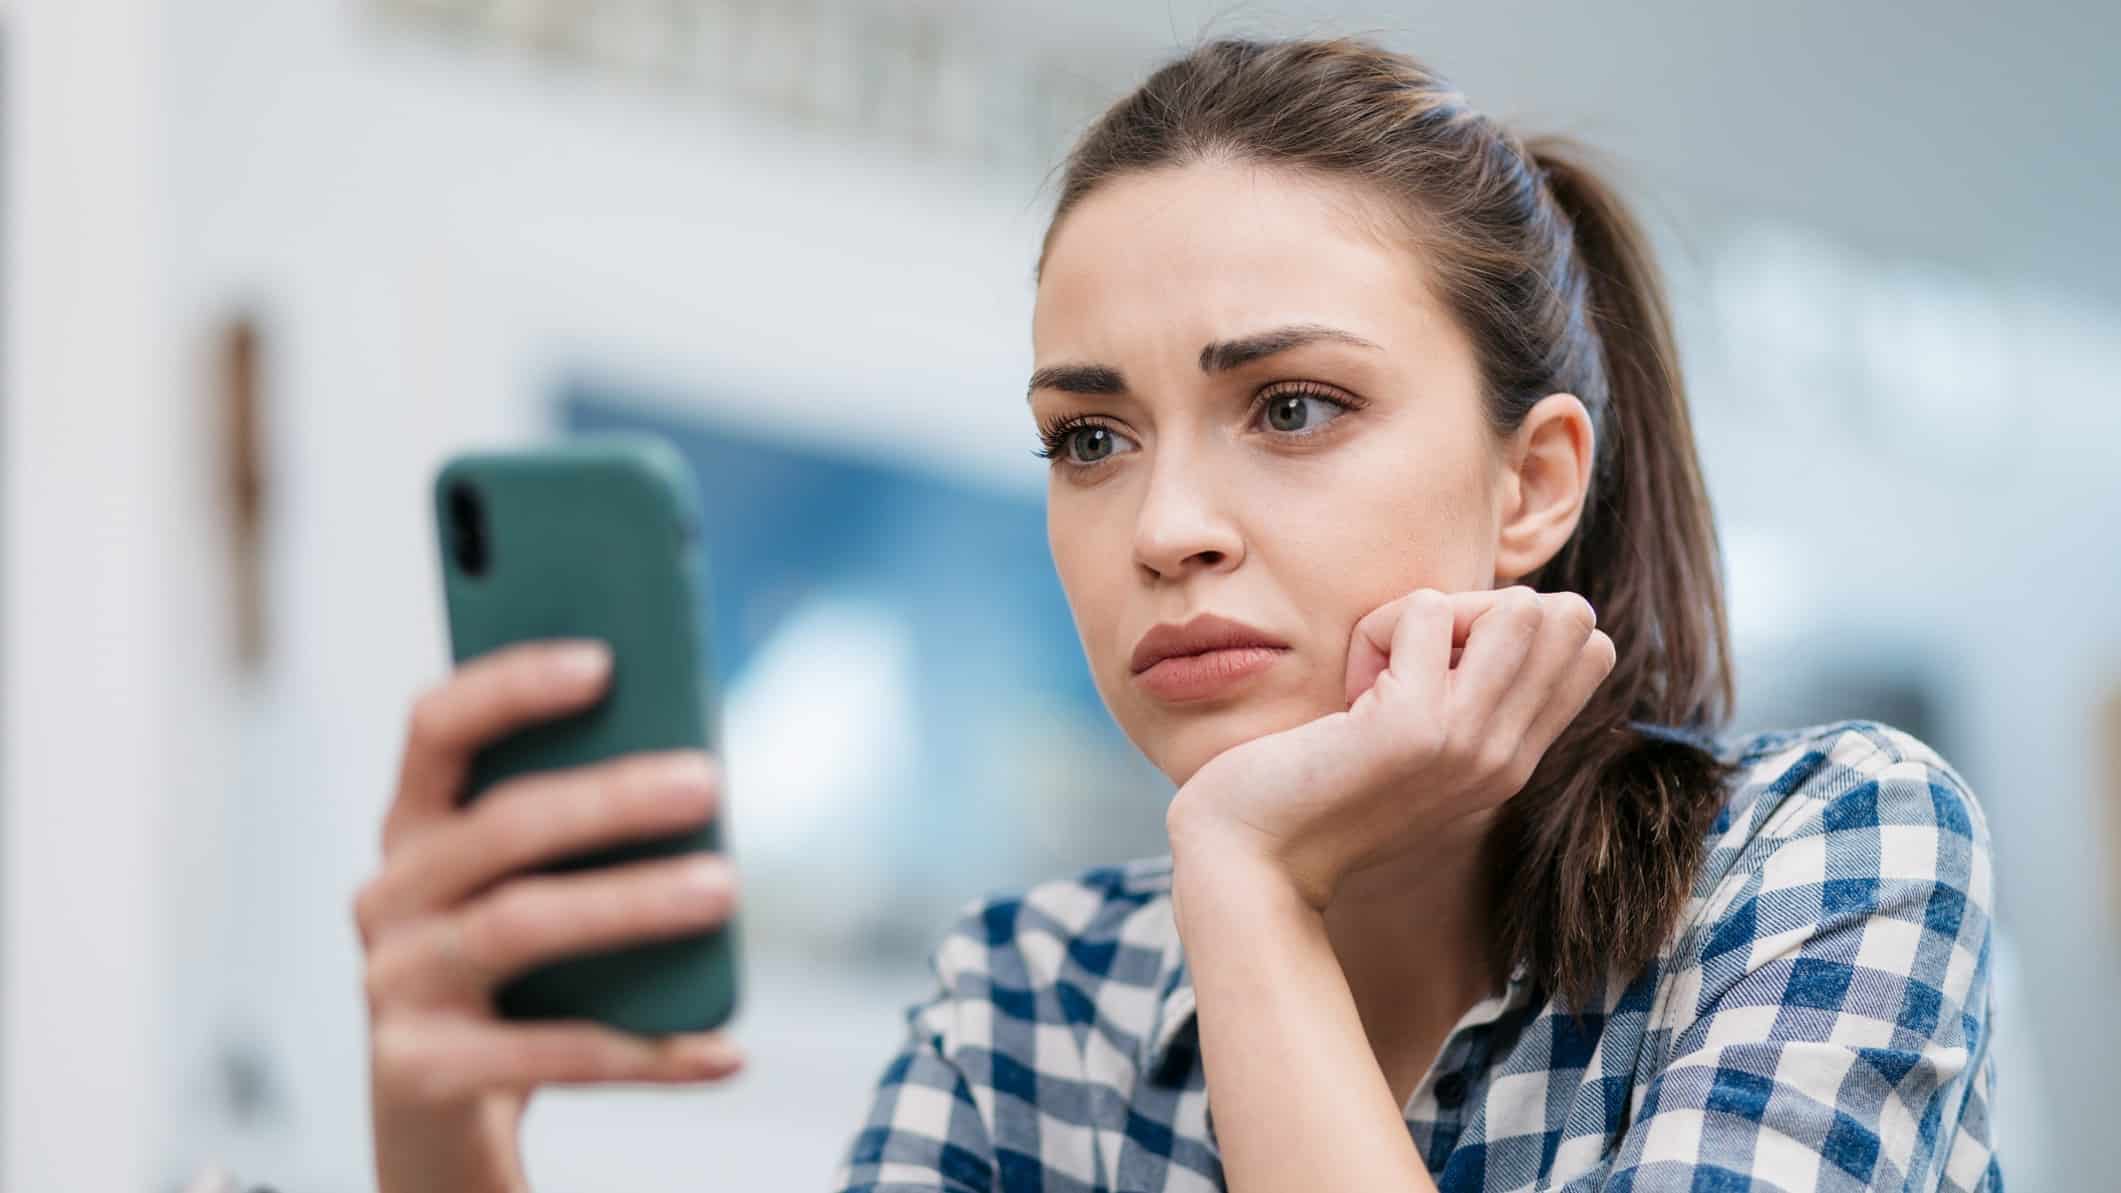 Close up of a sad young Caucasian woman reading about Nearmap's declining share price on her phone